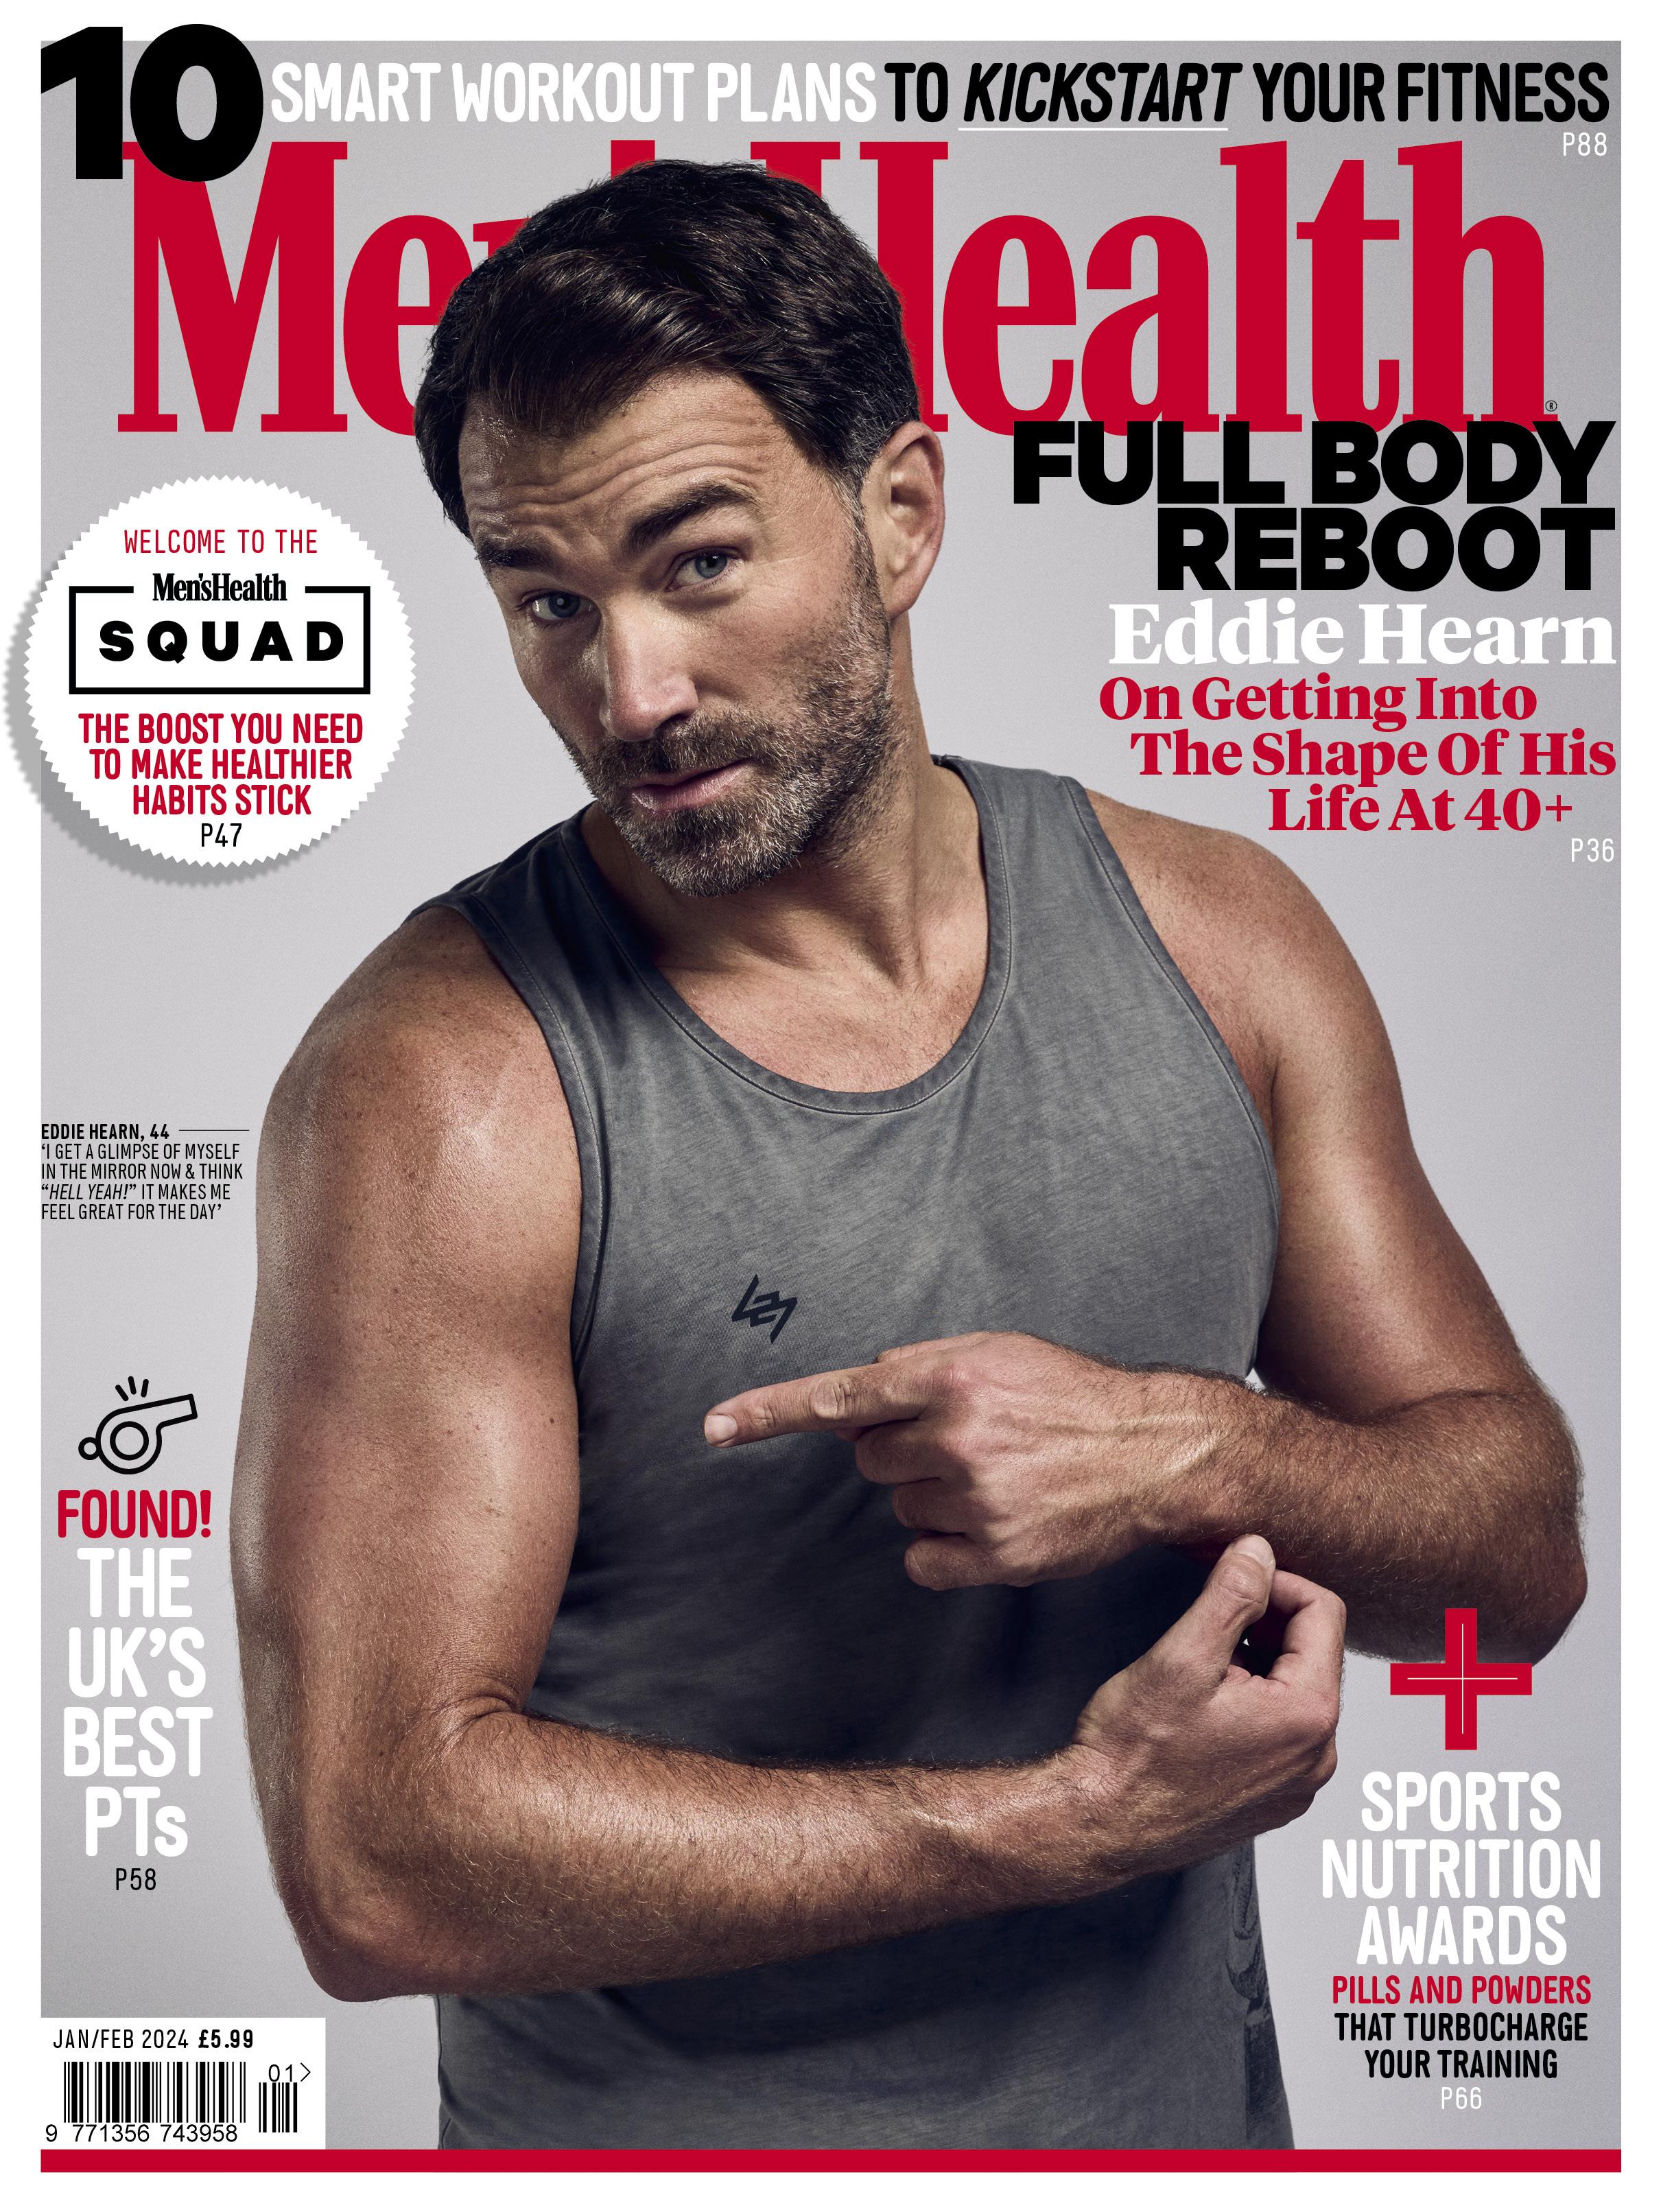 Hearn featured on the cover of Men's Health